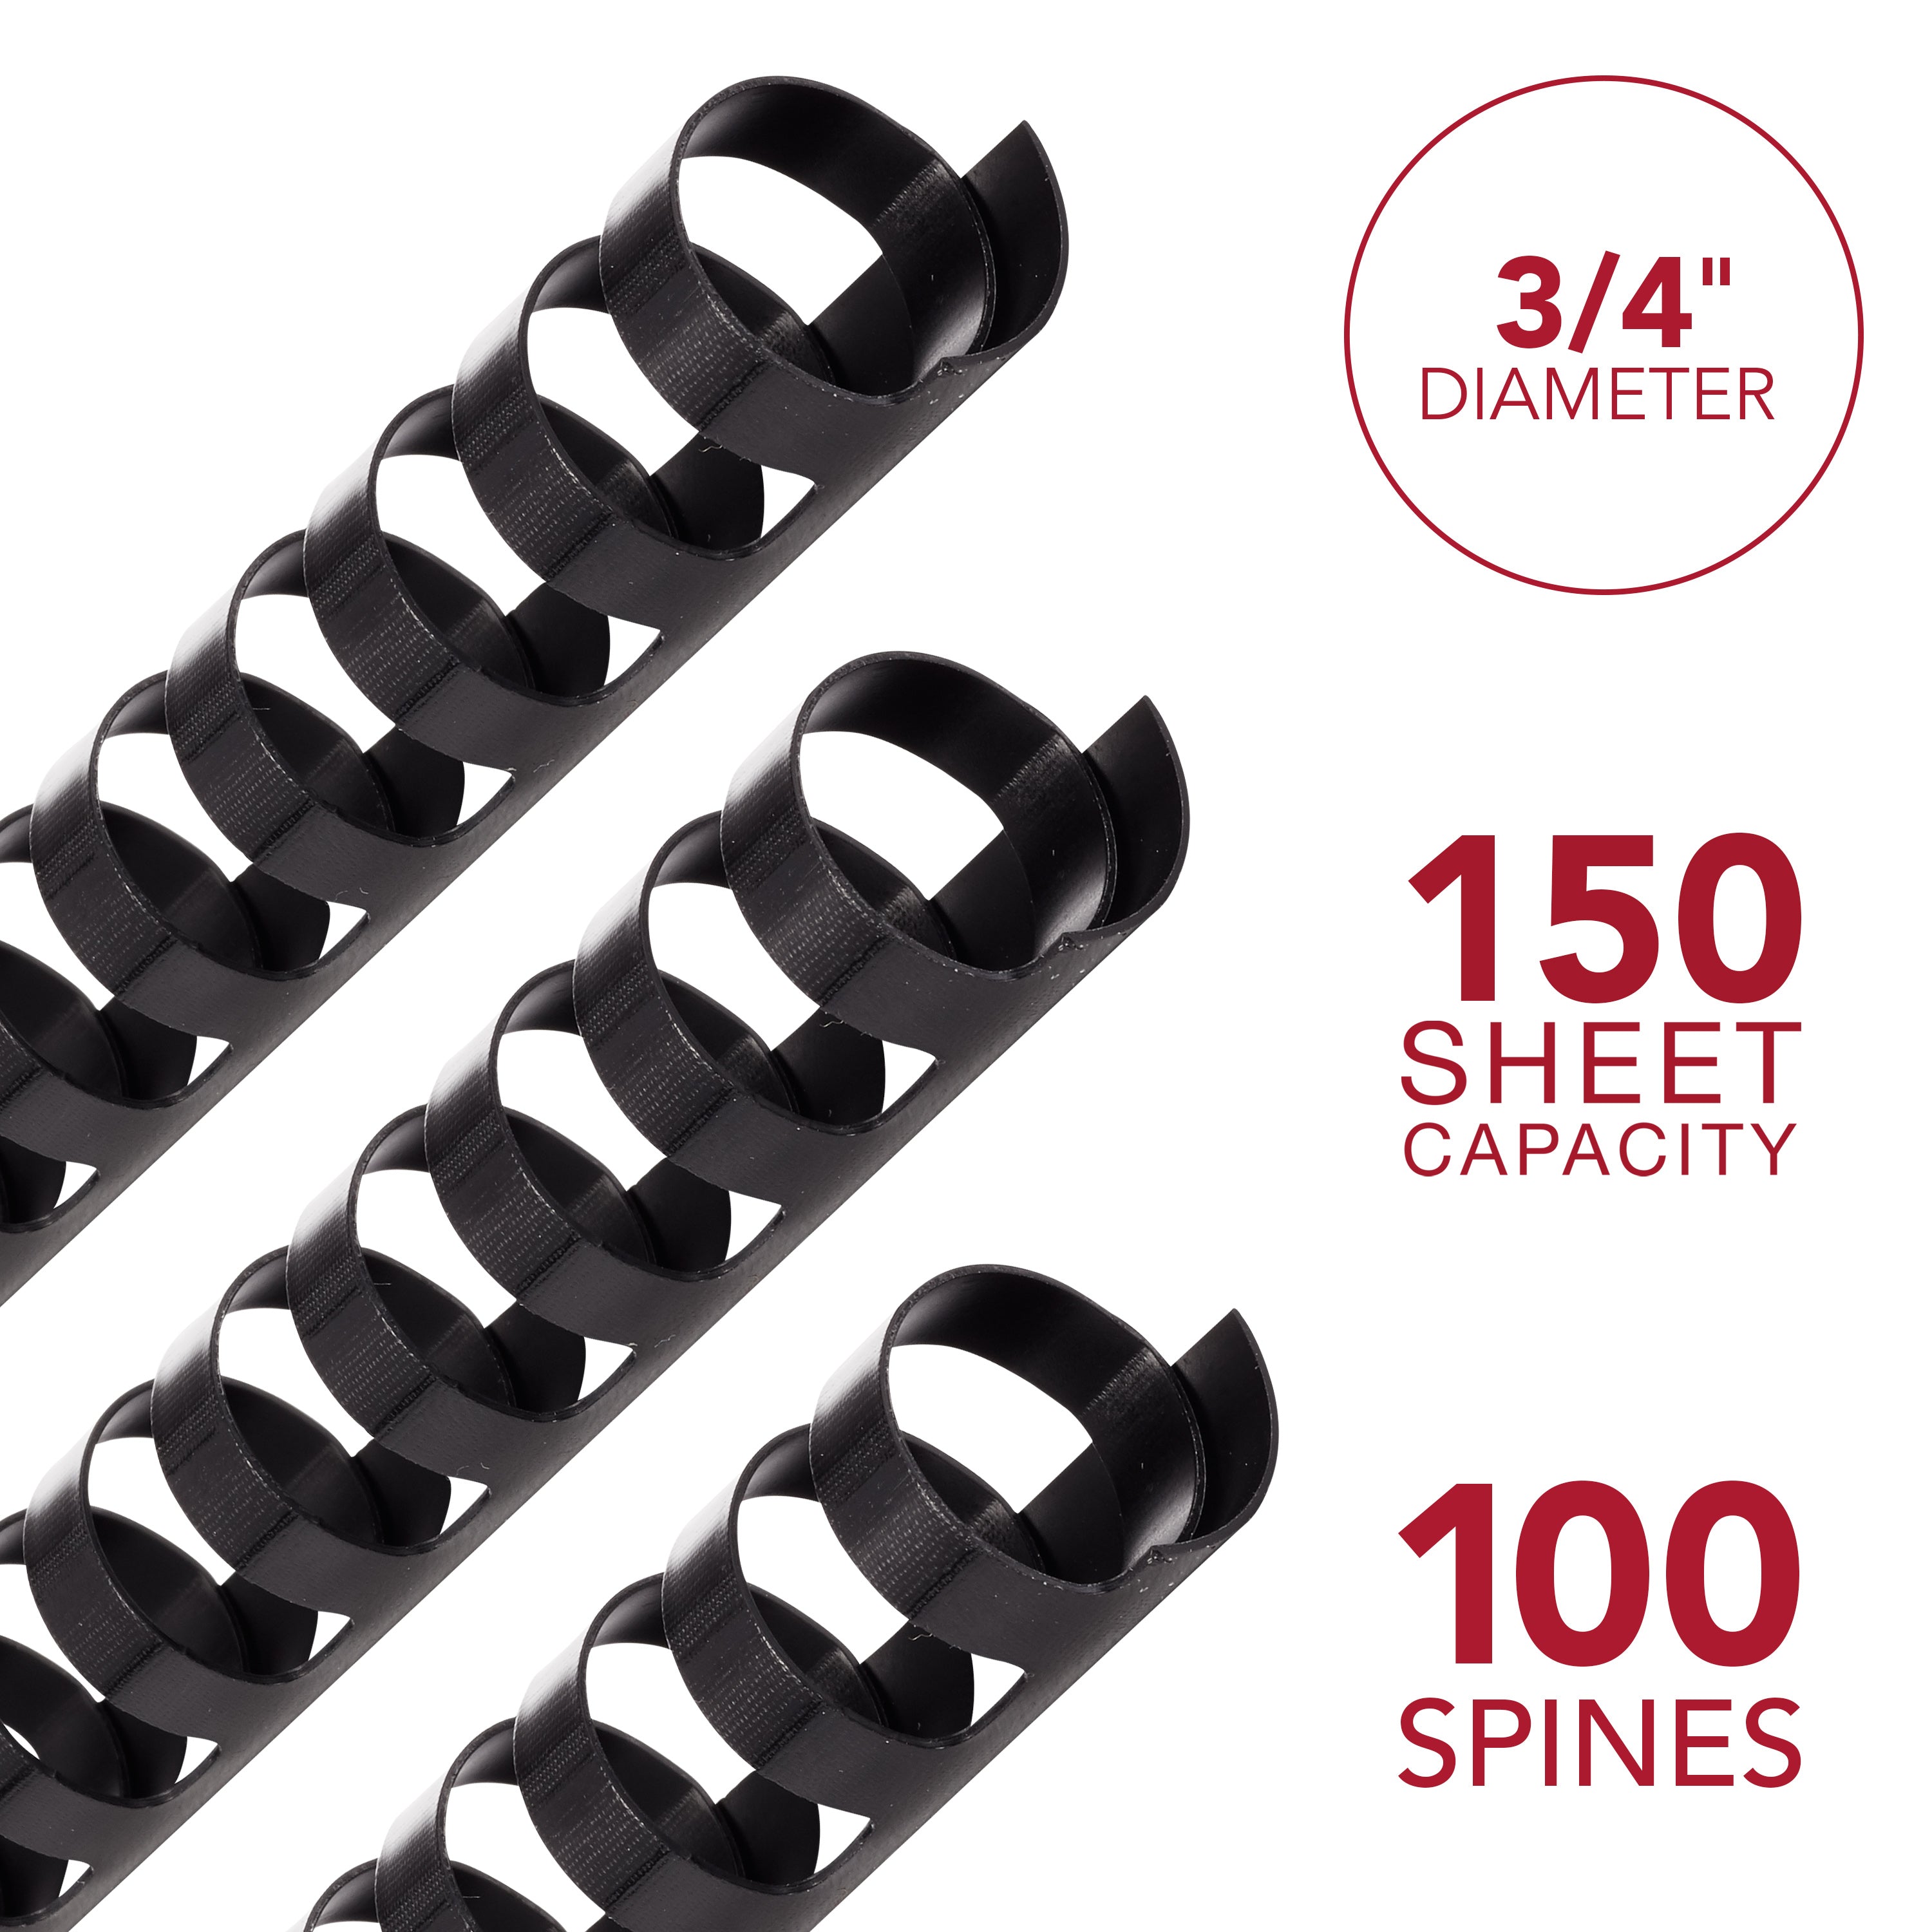 GBC CombBind 3/4" Binding Spines (100 Pack)